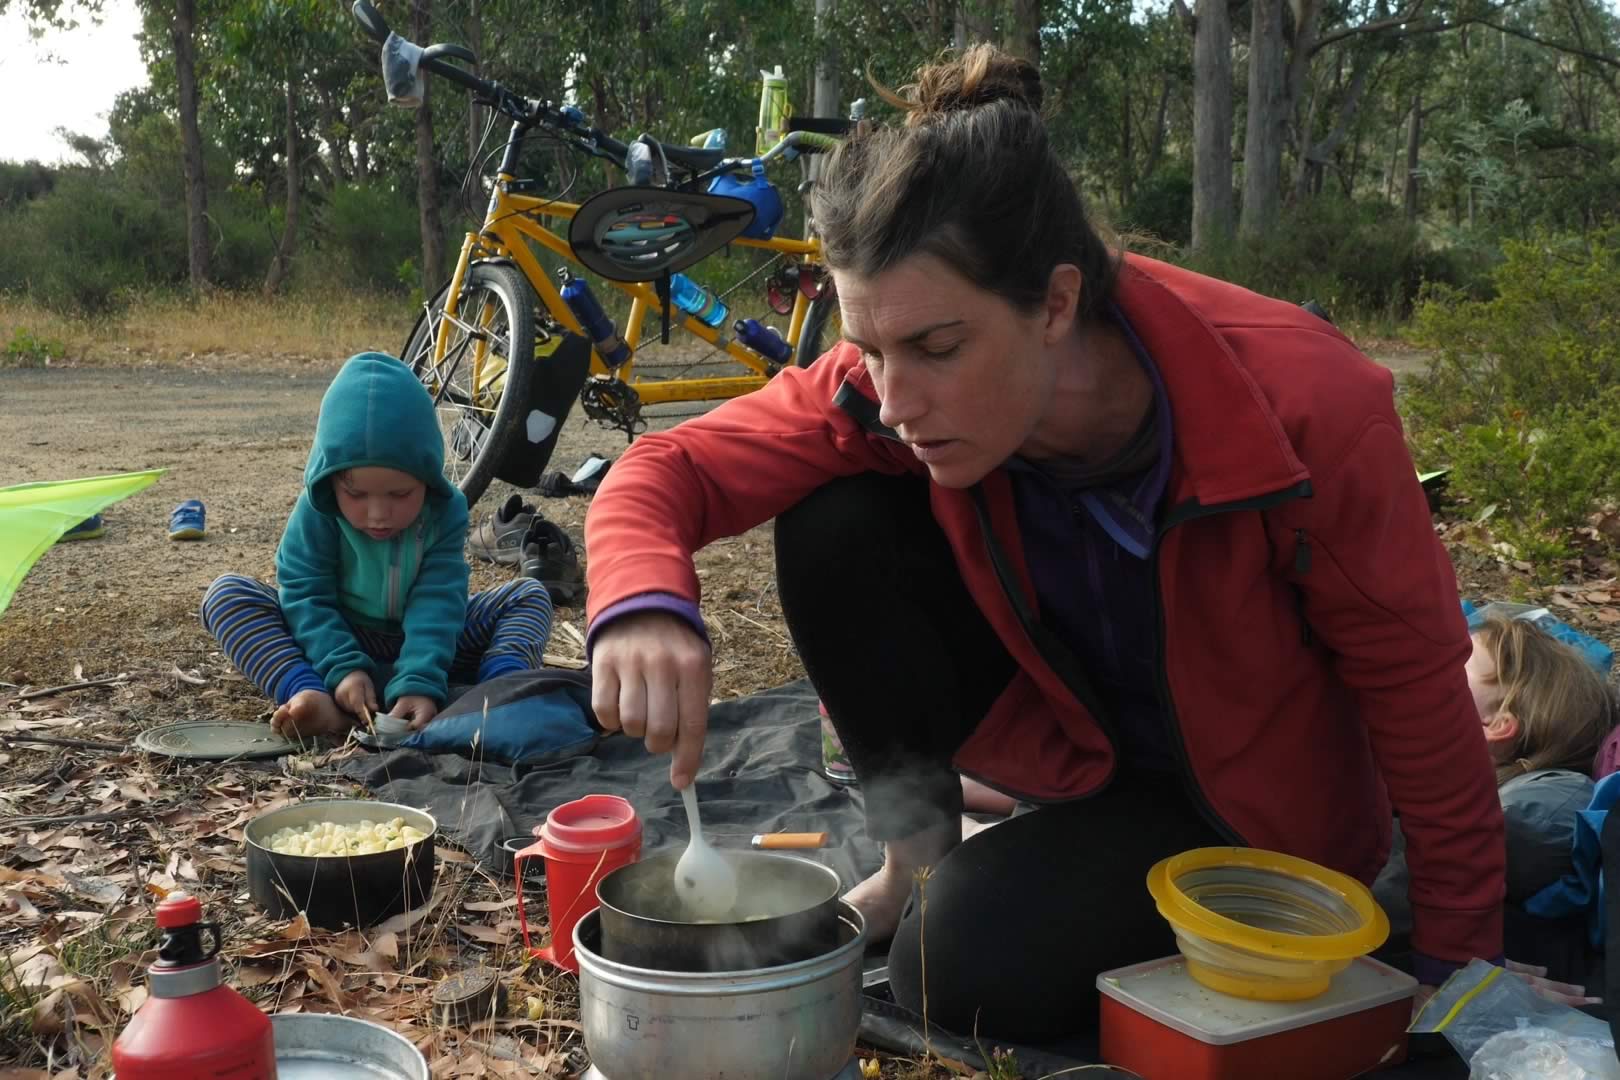 Cooking with the camp stove. Photo: Andrew Hughes.